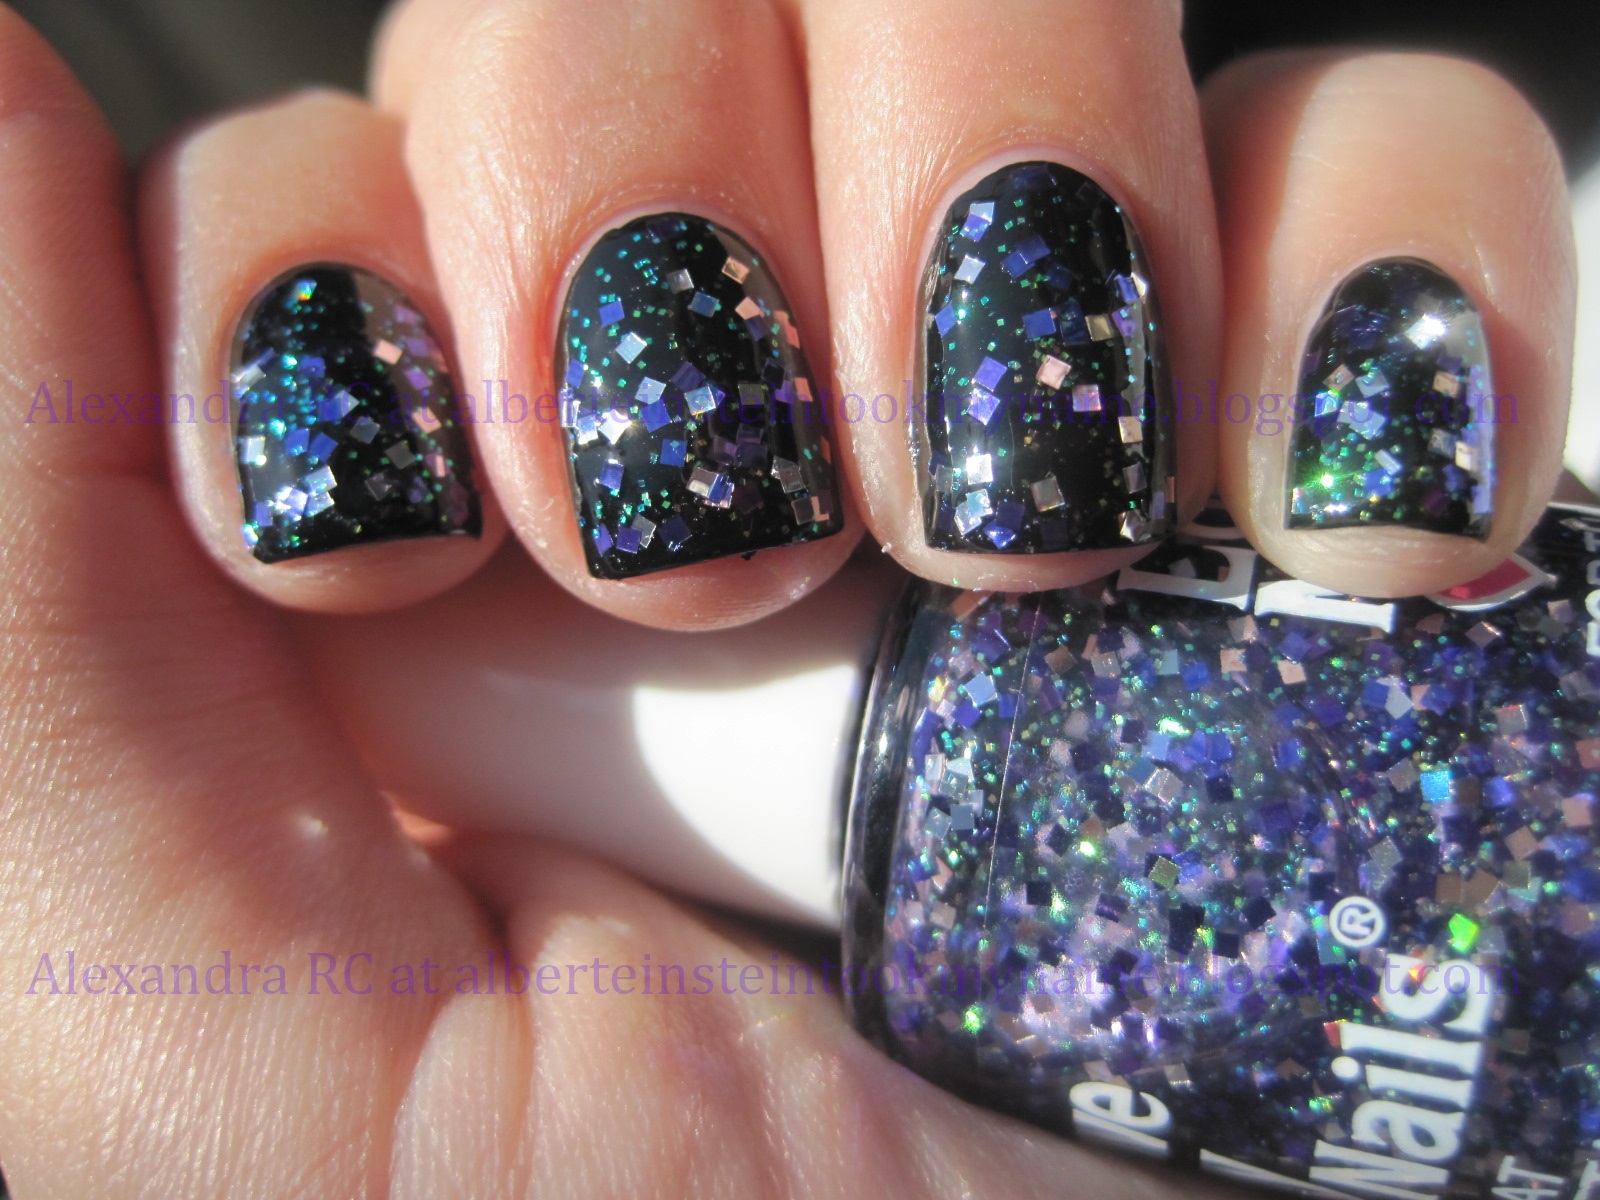 Sparkly Vernis: Love My Nails All That is really as good as the name